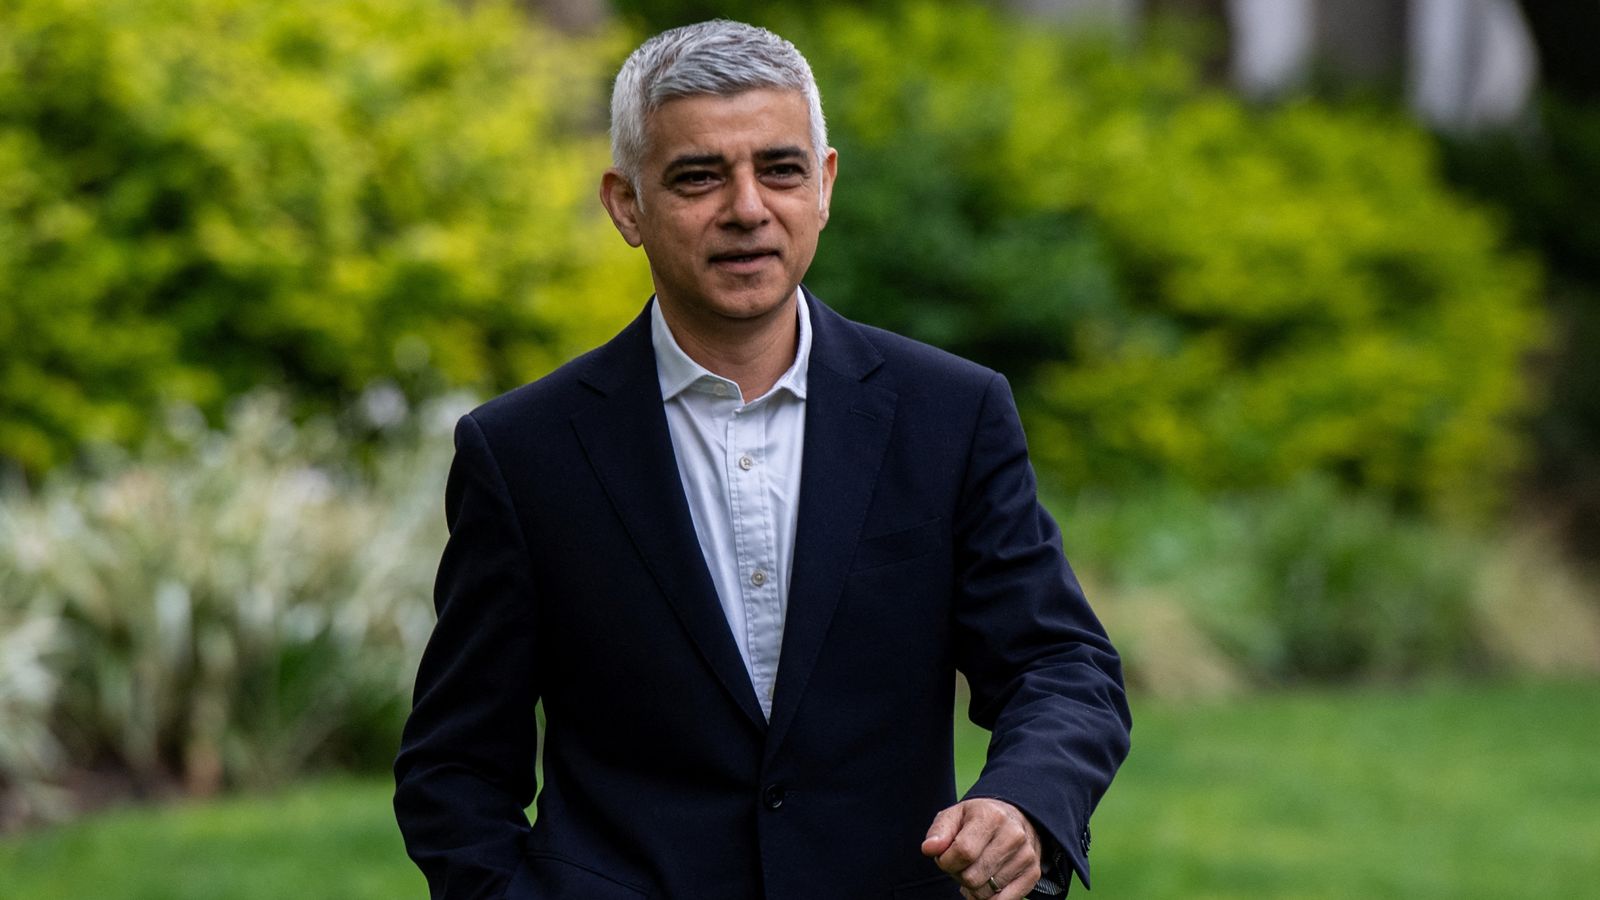 Sadiq Khan secures convincing win over Tory rival in London mayoral